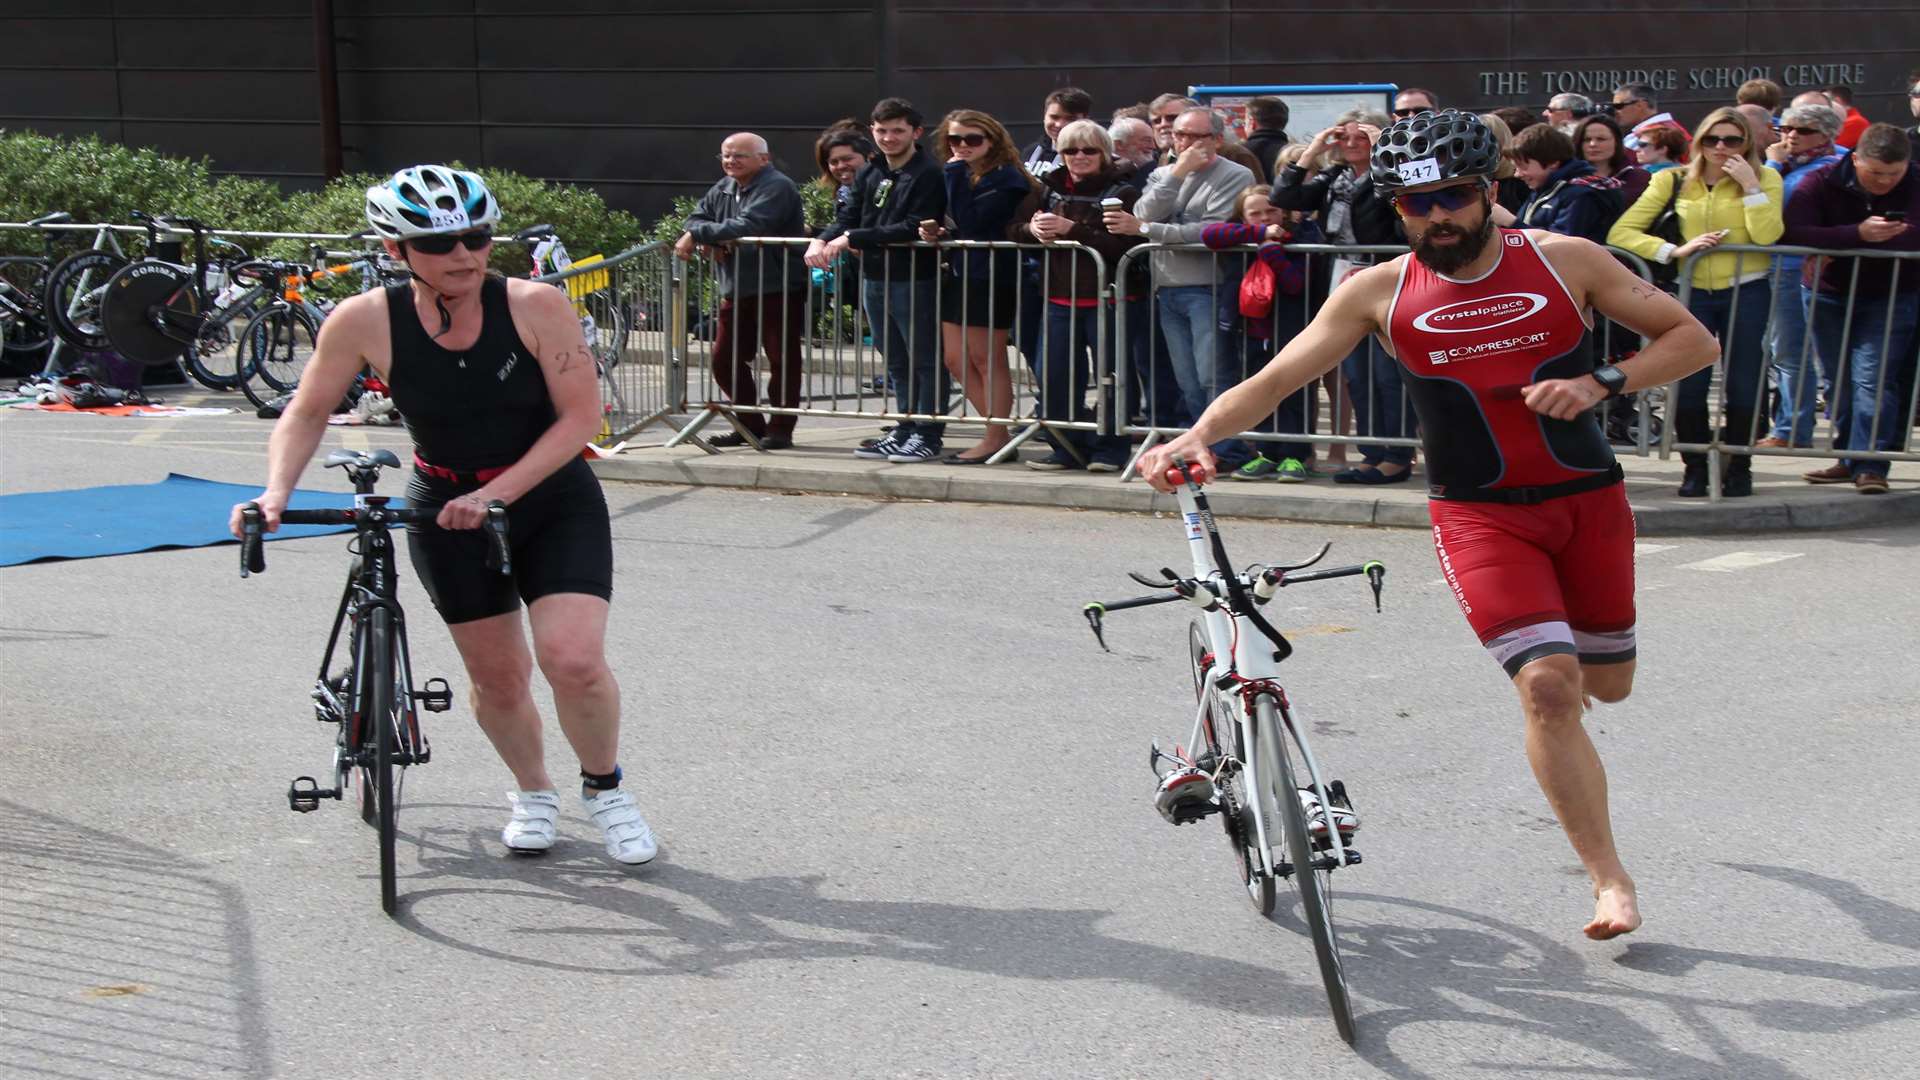 Two athletes prepare to start the cycle discipline